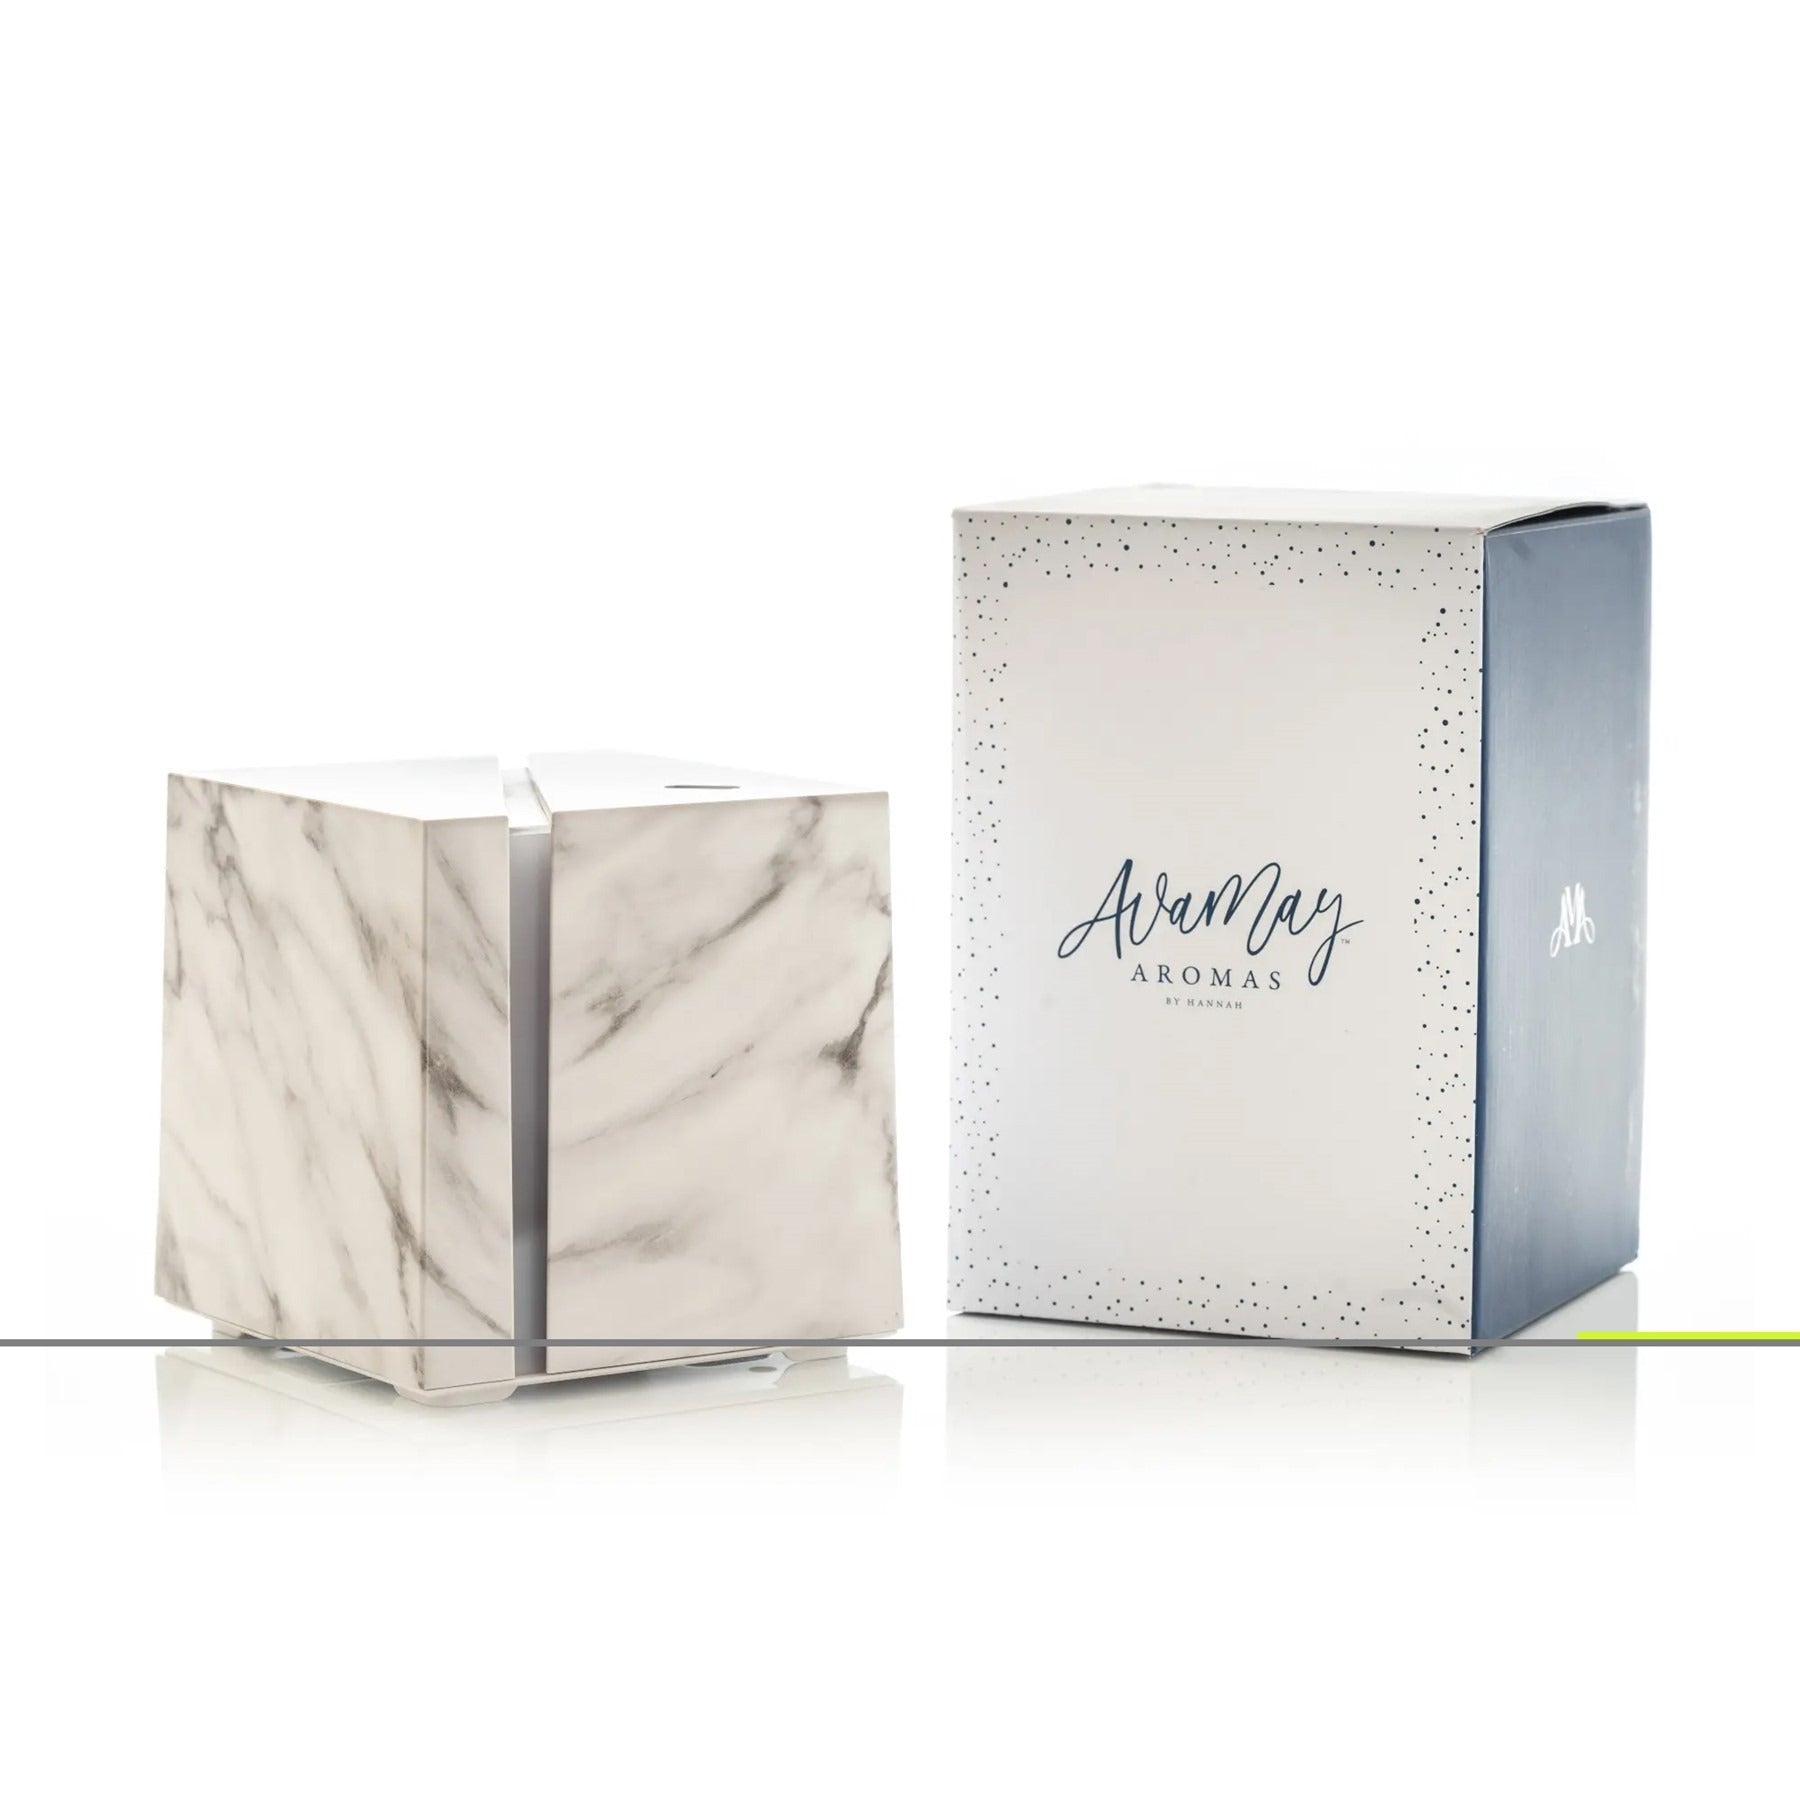 View Ava May Marble Aroma Diffuser White information